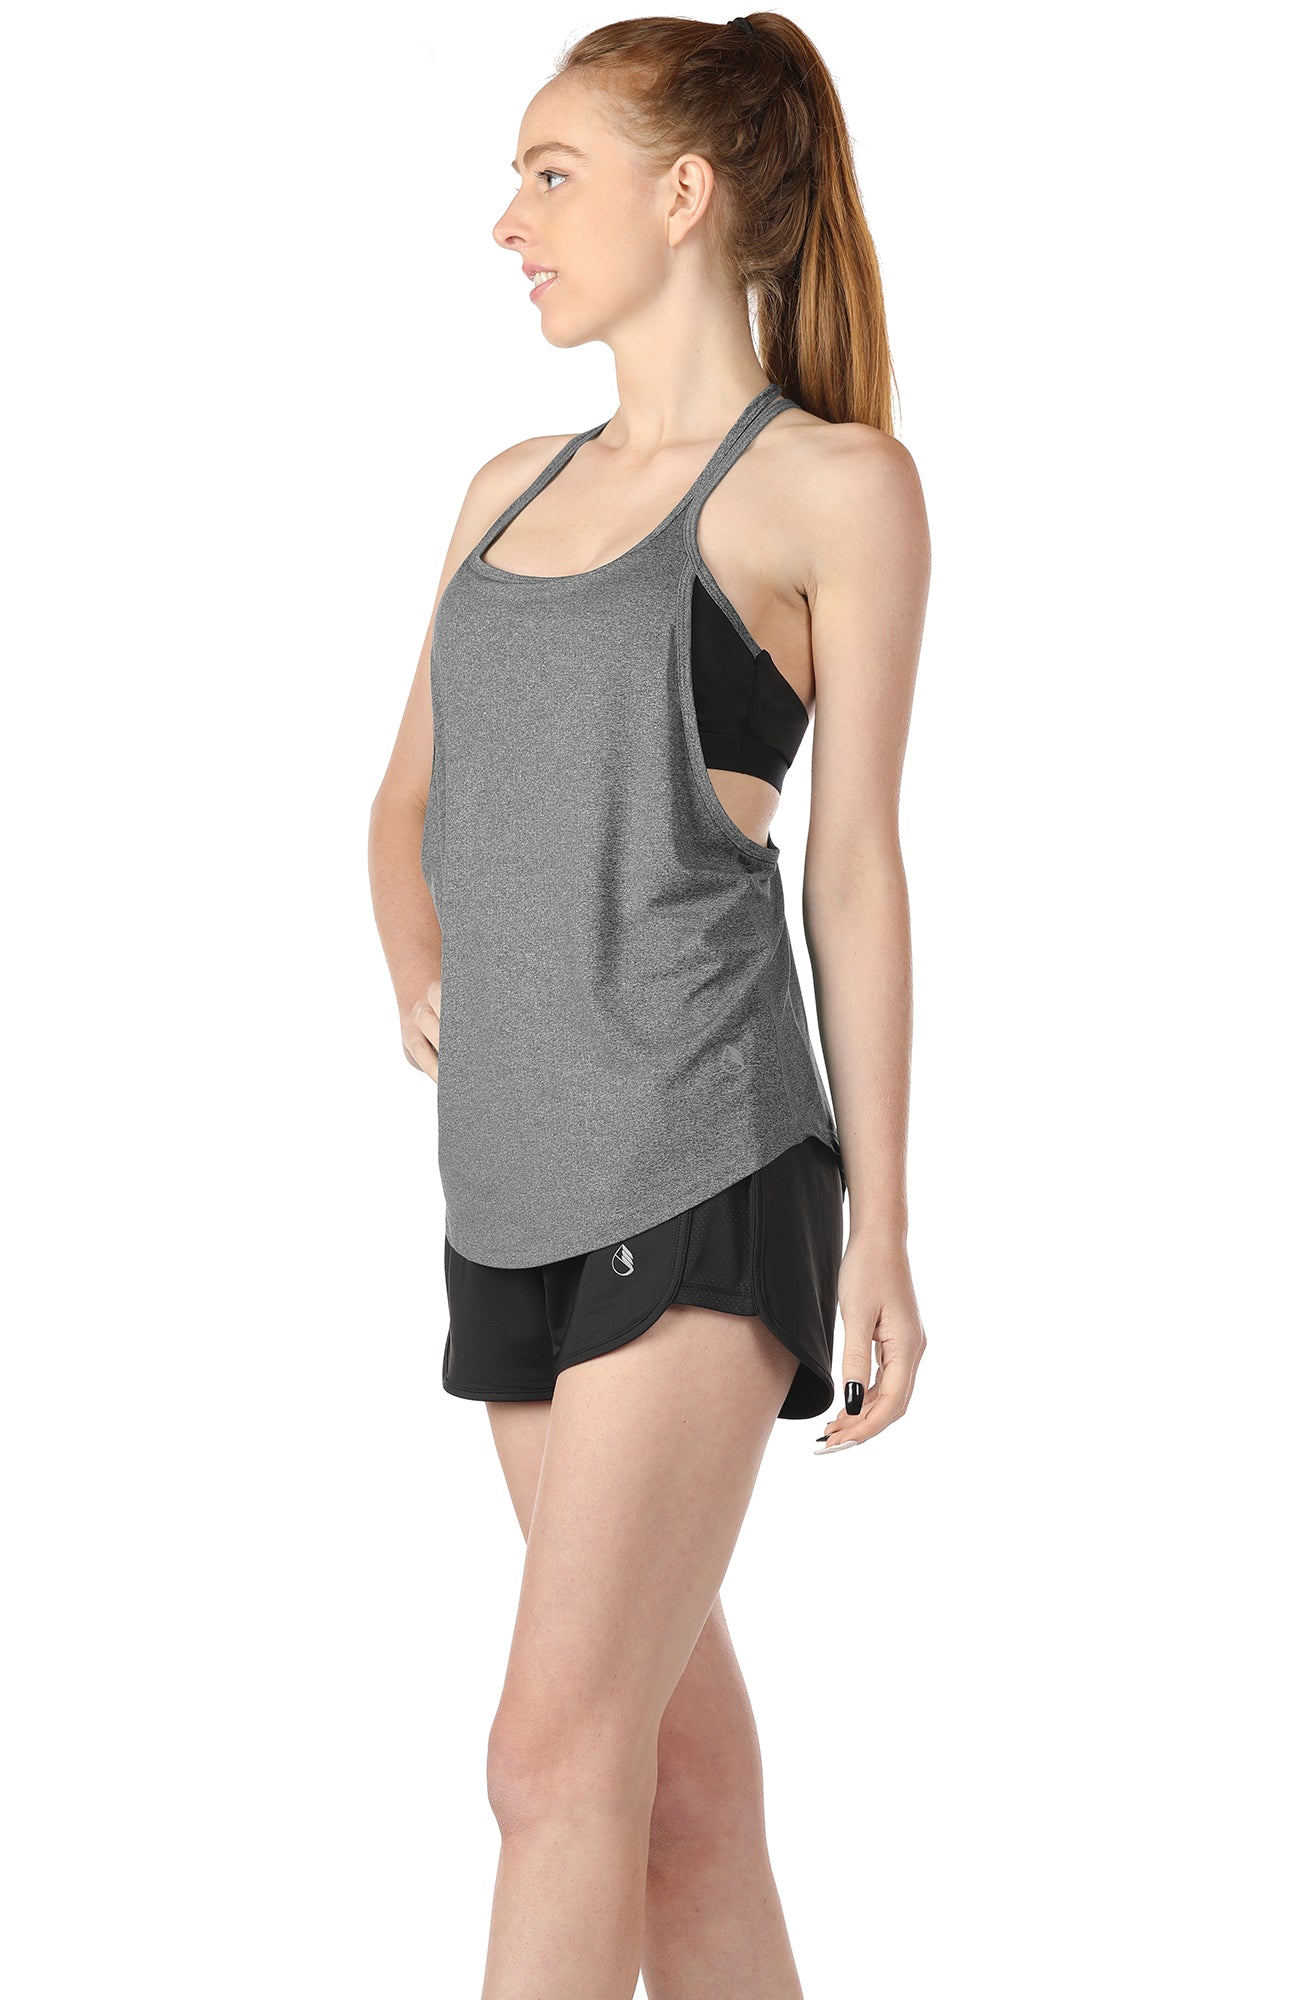 icyzone Workout Tank Tops with Built in Bra - Women's Strappy Athletic –  icyzonesports